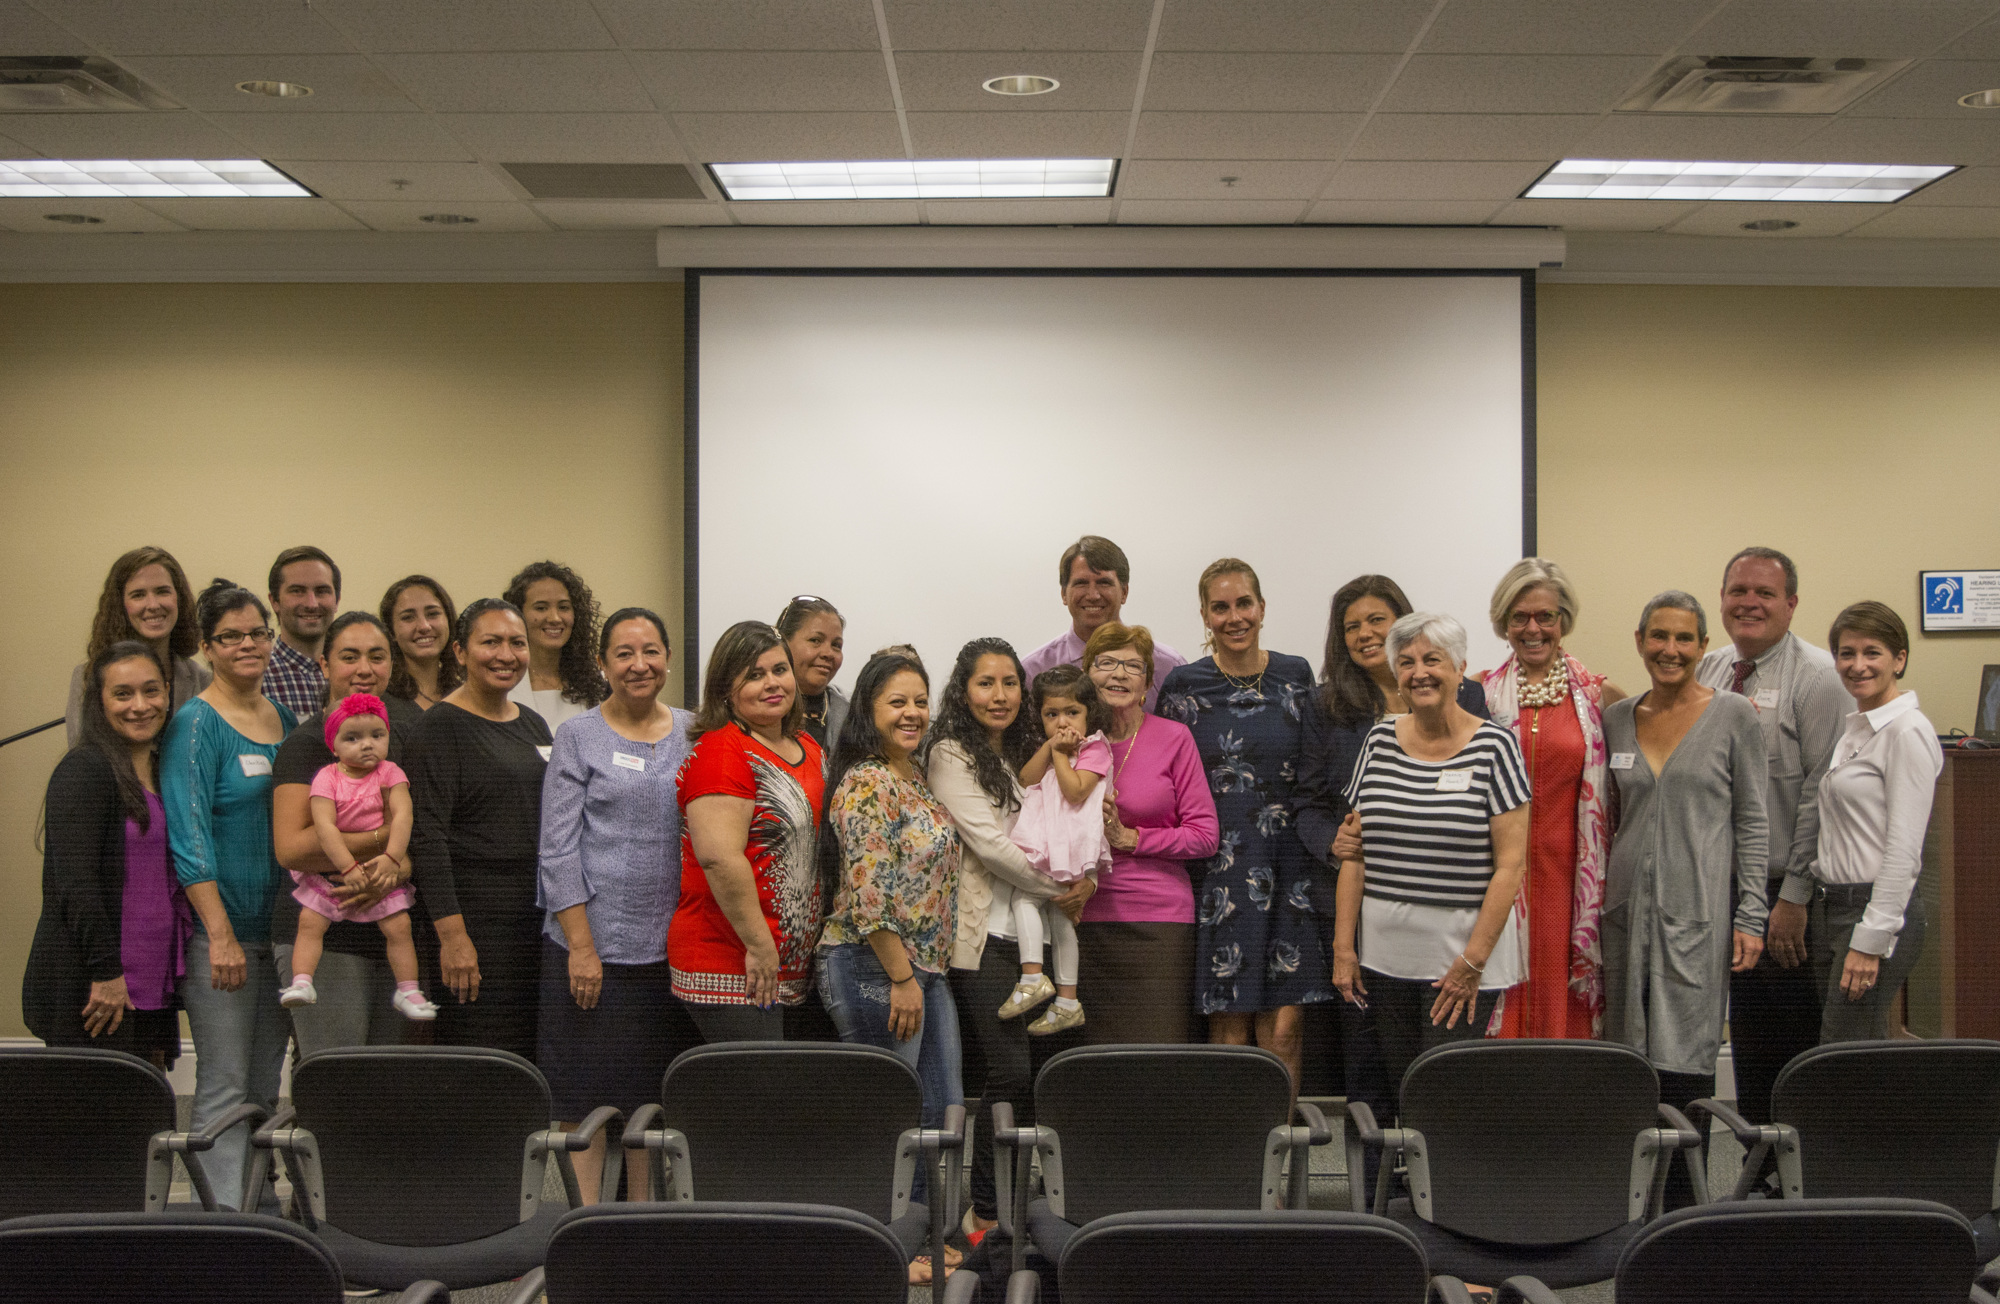 Community Foundation of Sarasota County and UnidosNow staff gathered with Families Together program participants to celebrate the success of the dual generational program.